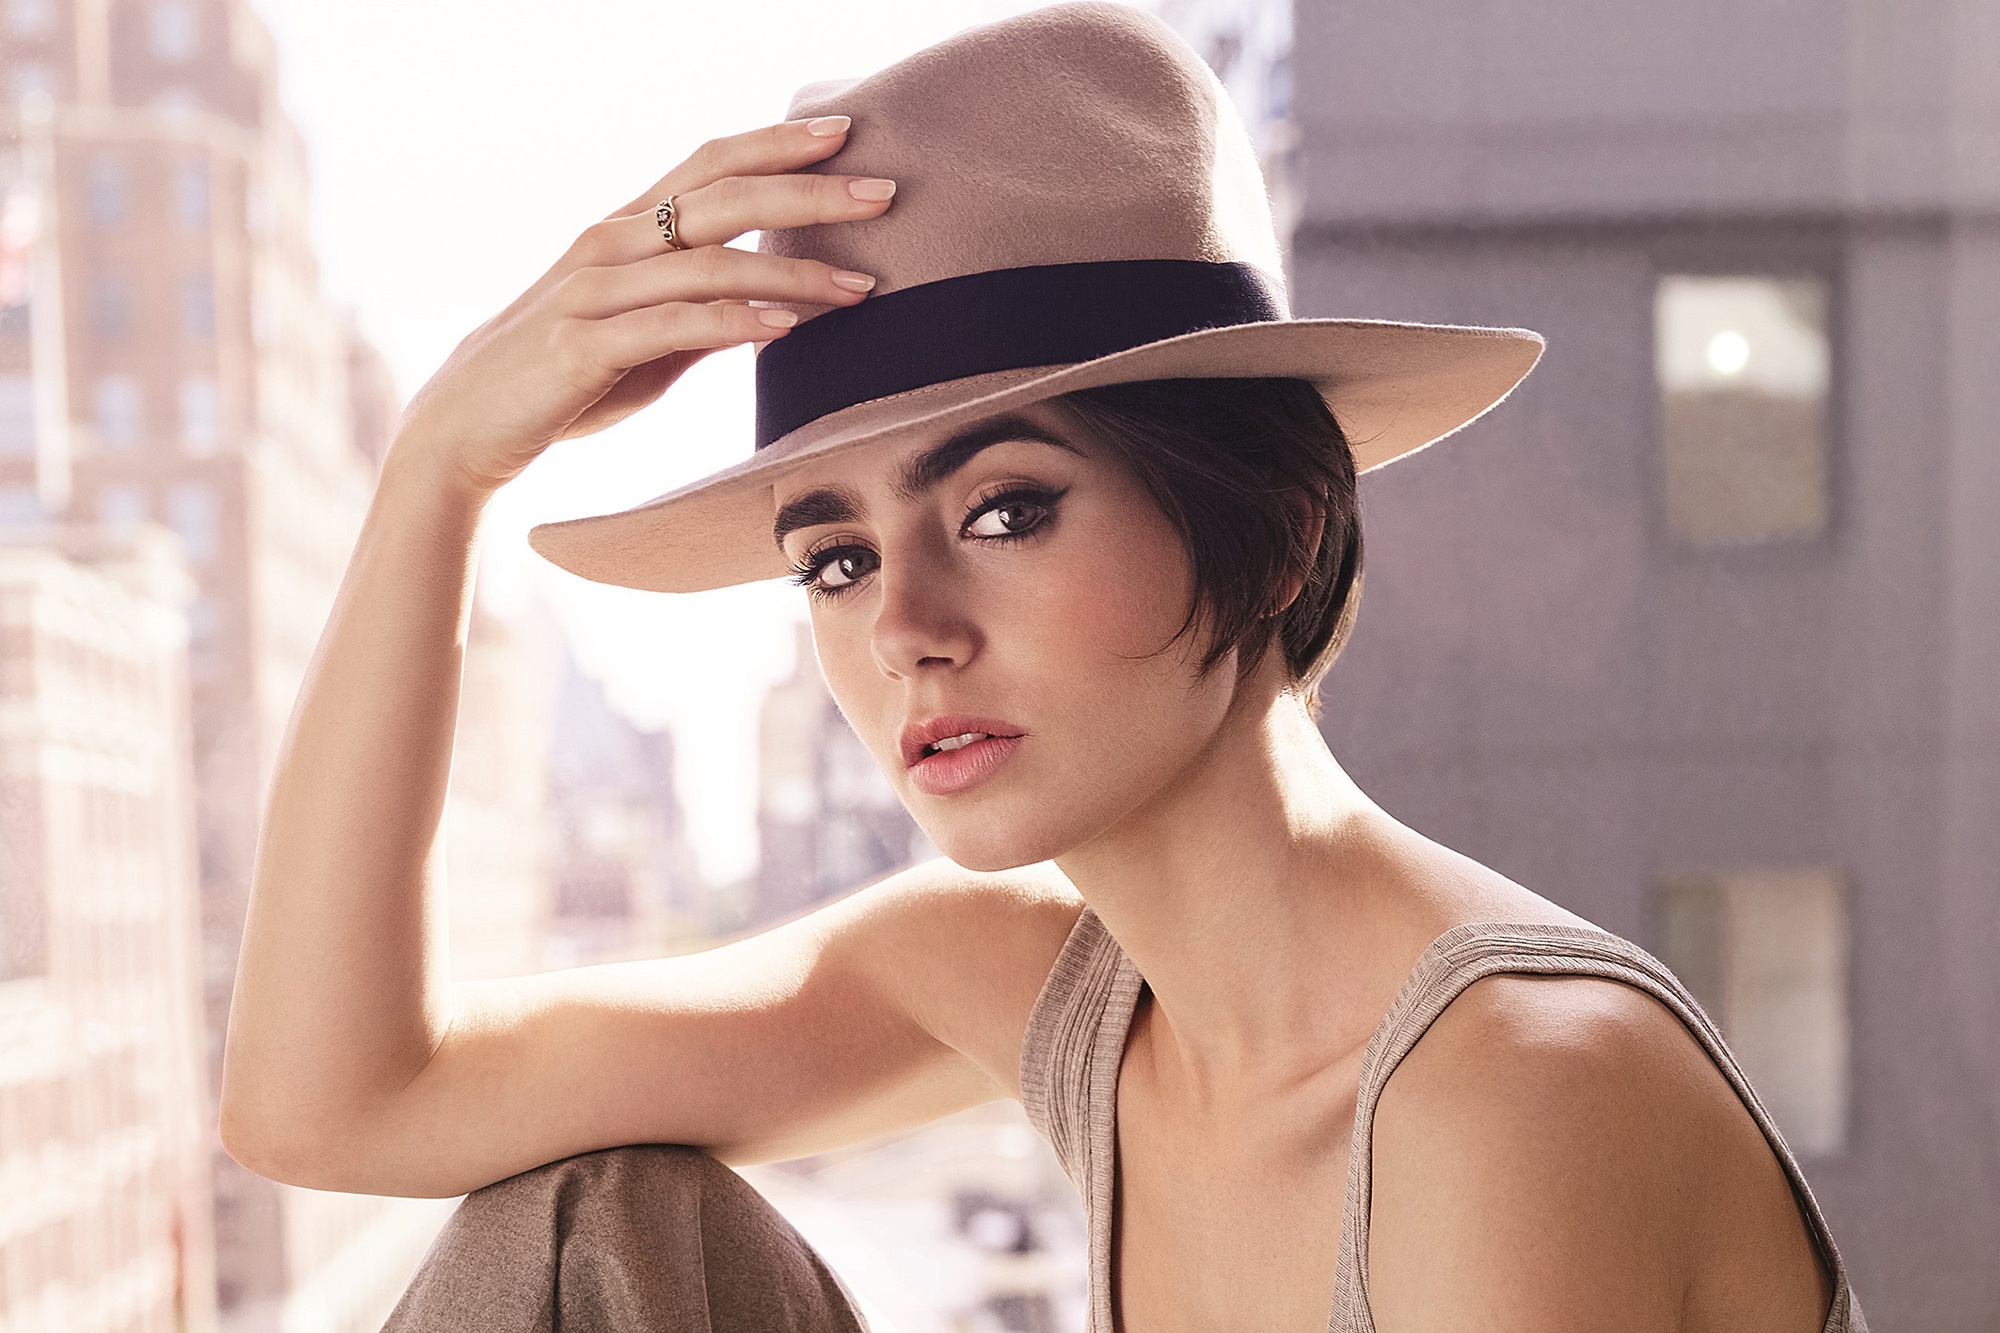 People 2000x1333 Lily Collins women celebrity women with hats eyeliner short hair women outdoors actress